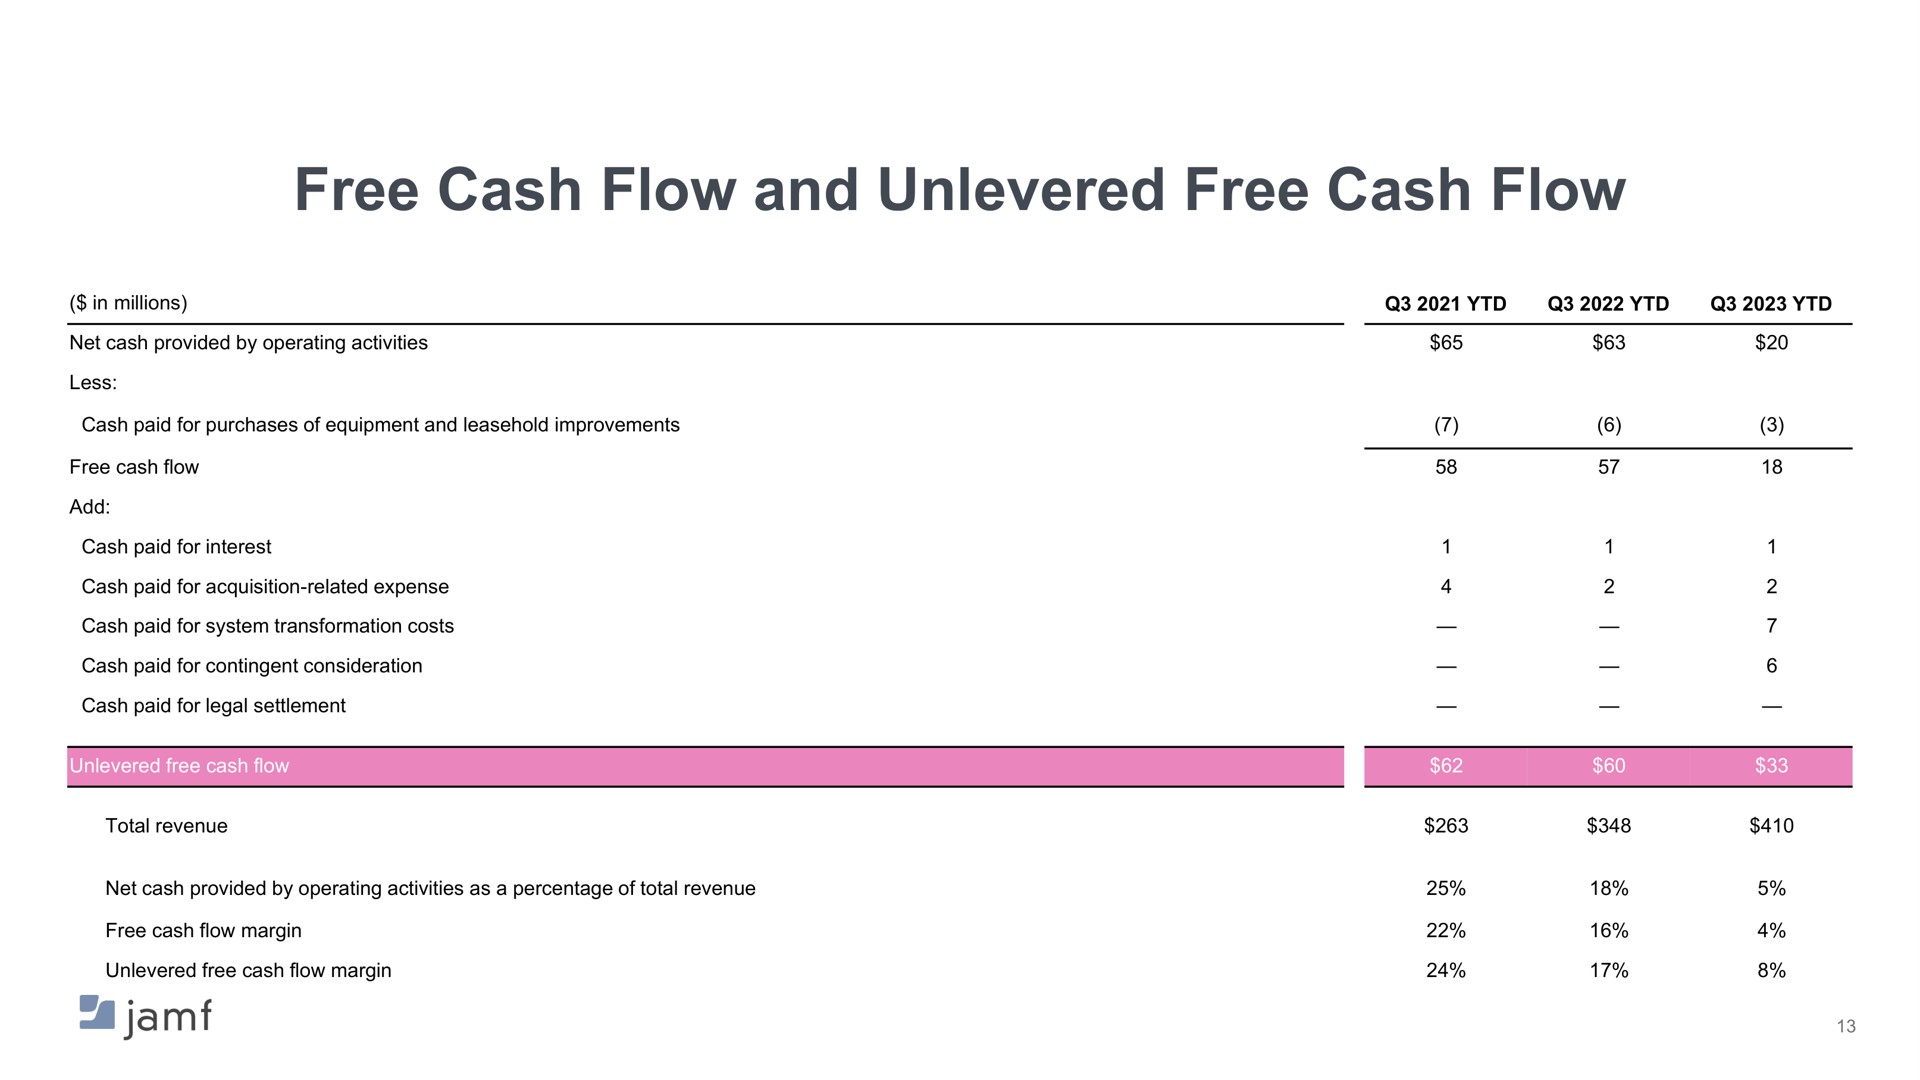 free cash flow and free cash flow | Jamf